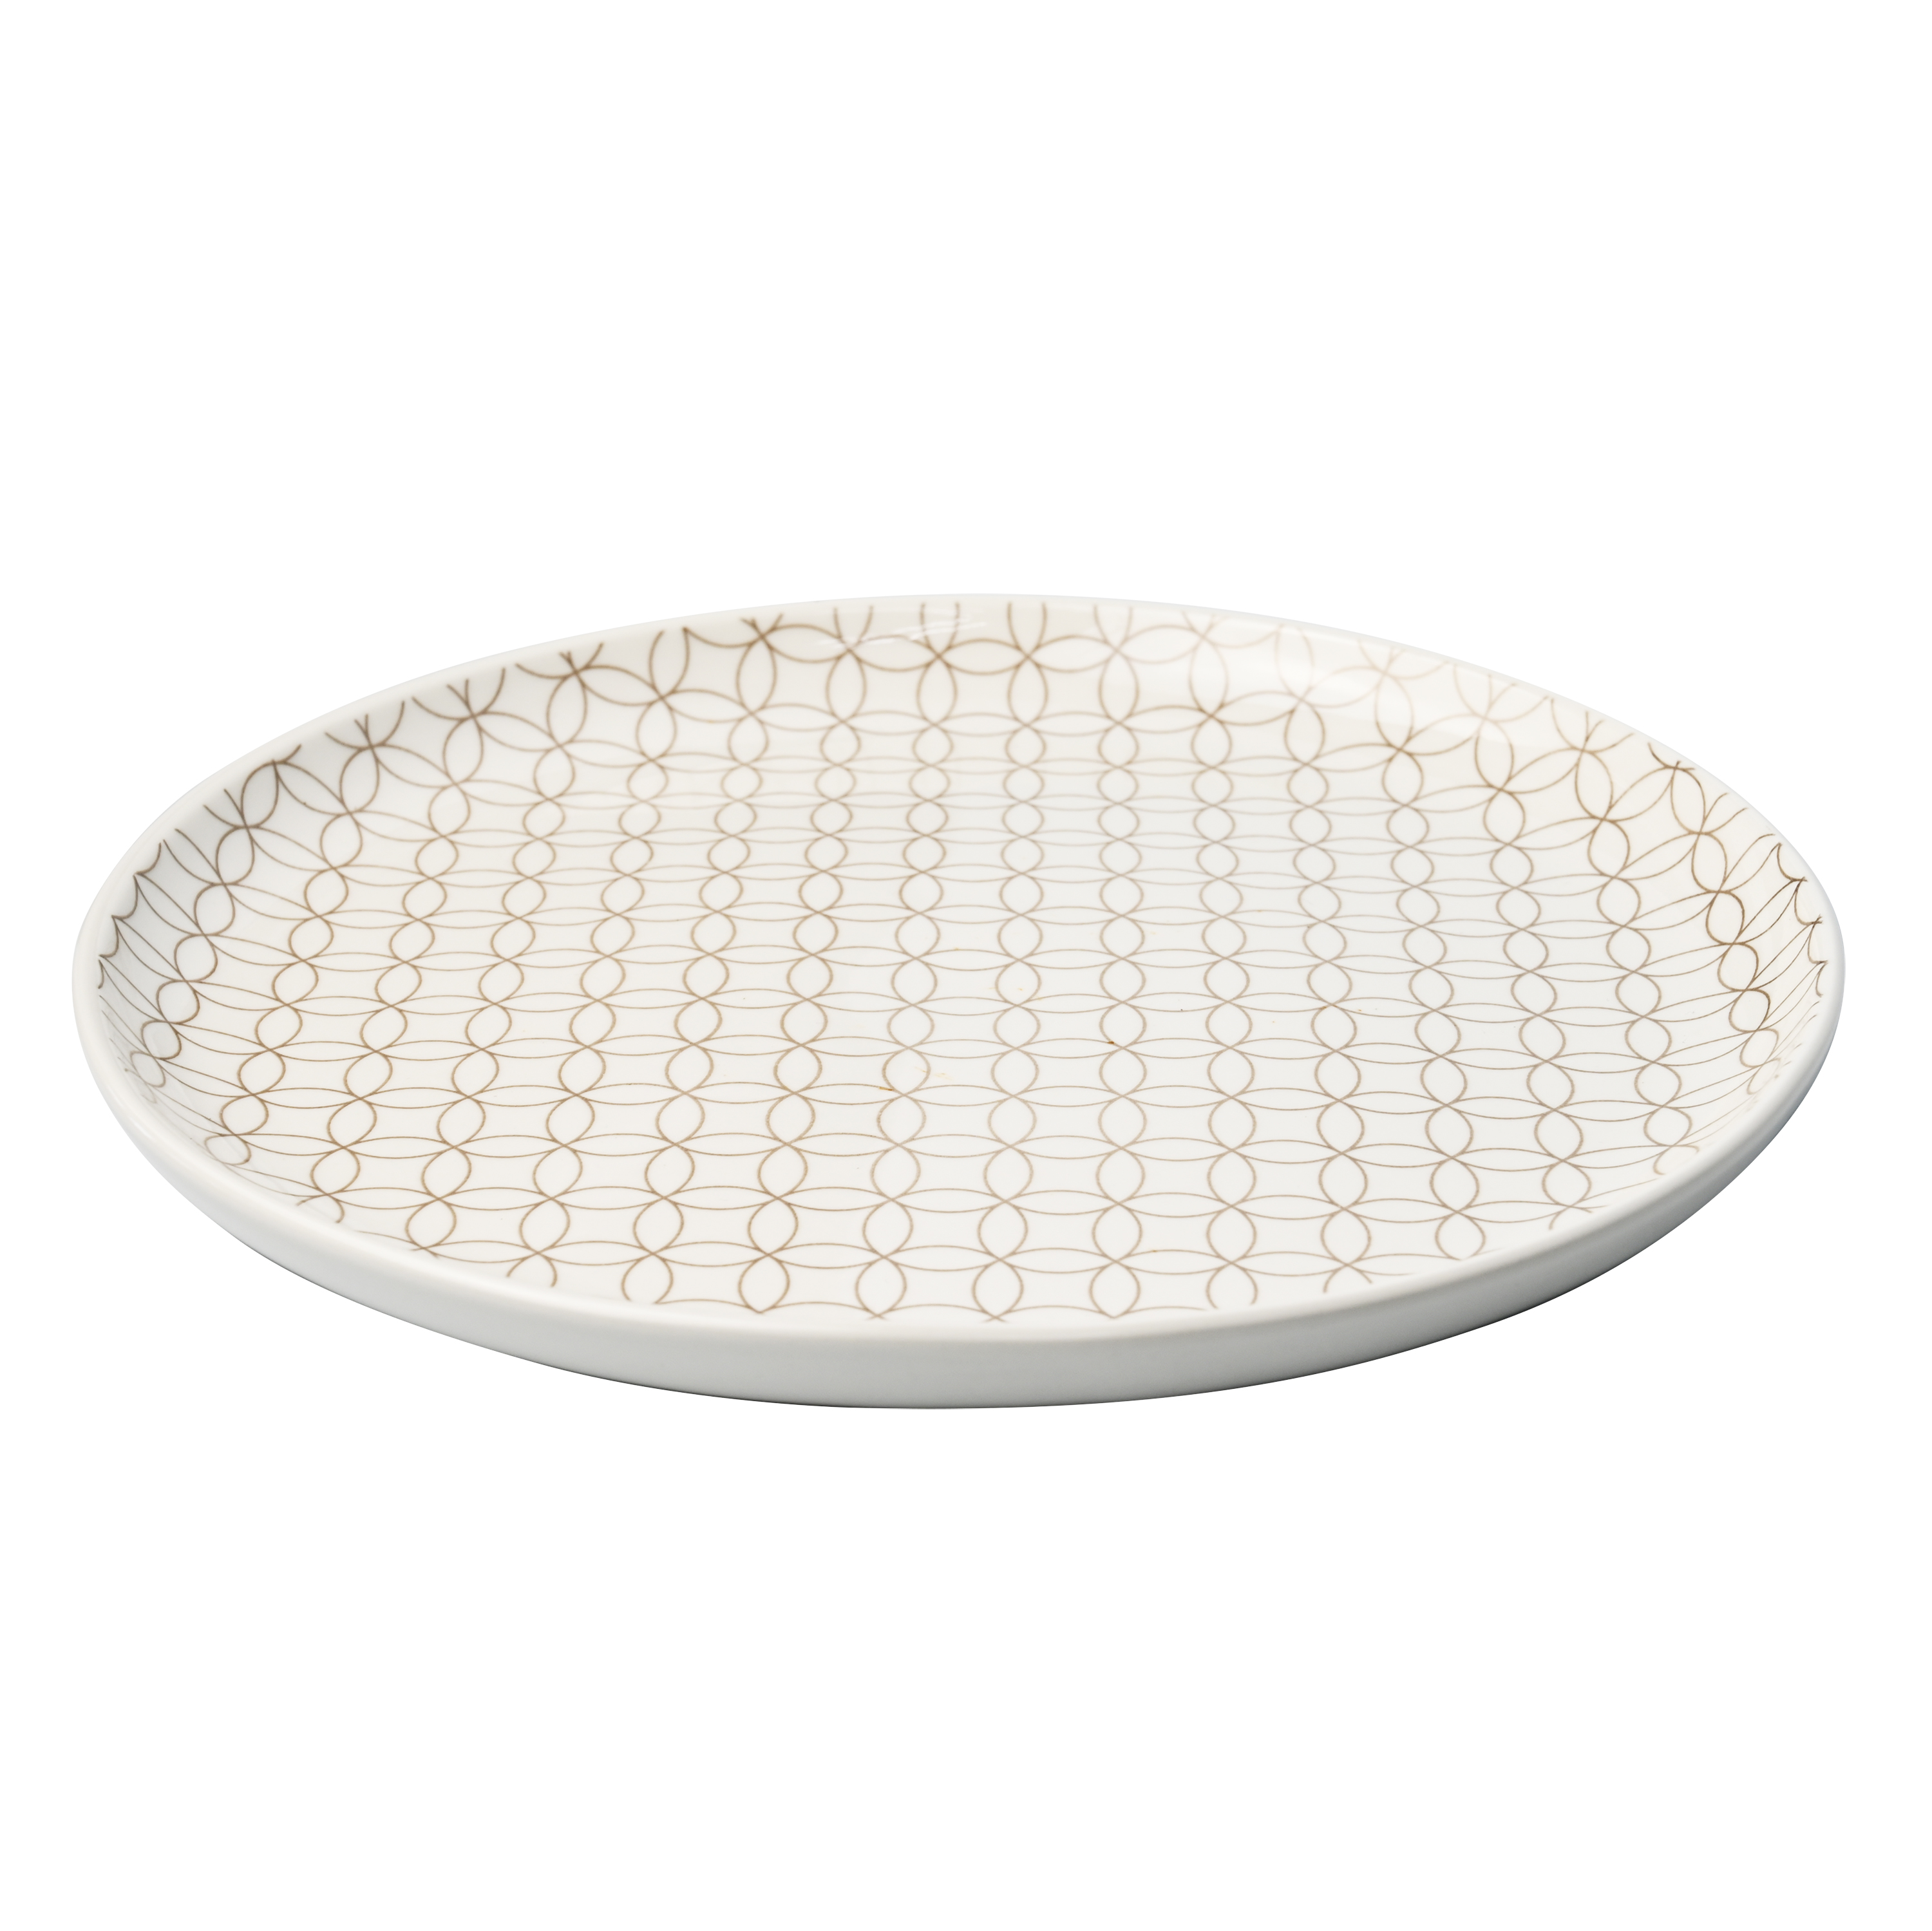 Mainstays Alessandra Brown 4-pack Stoneware Dinner Plate Set, 10.5" - image 5 of 9